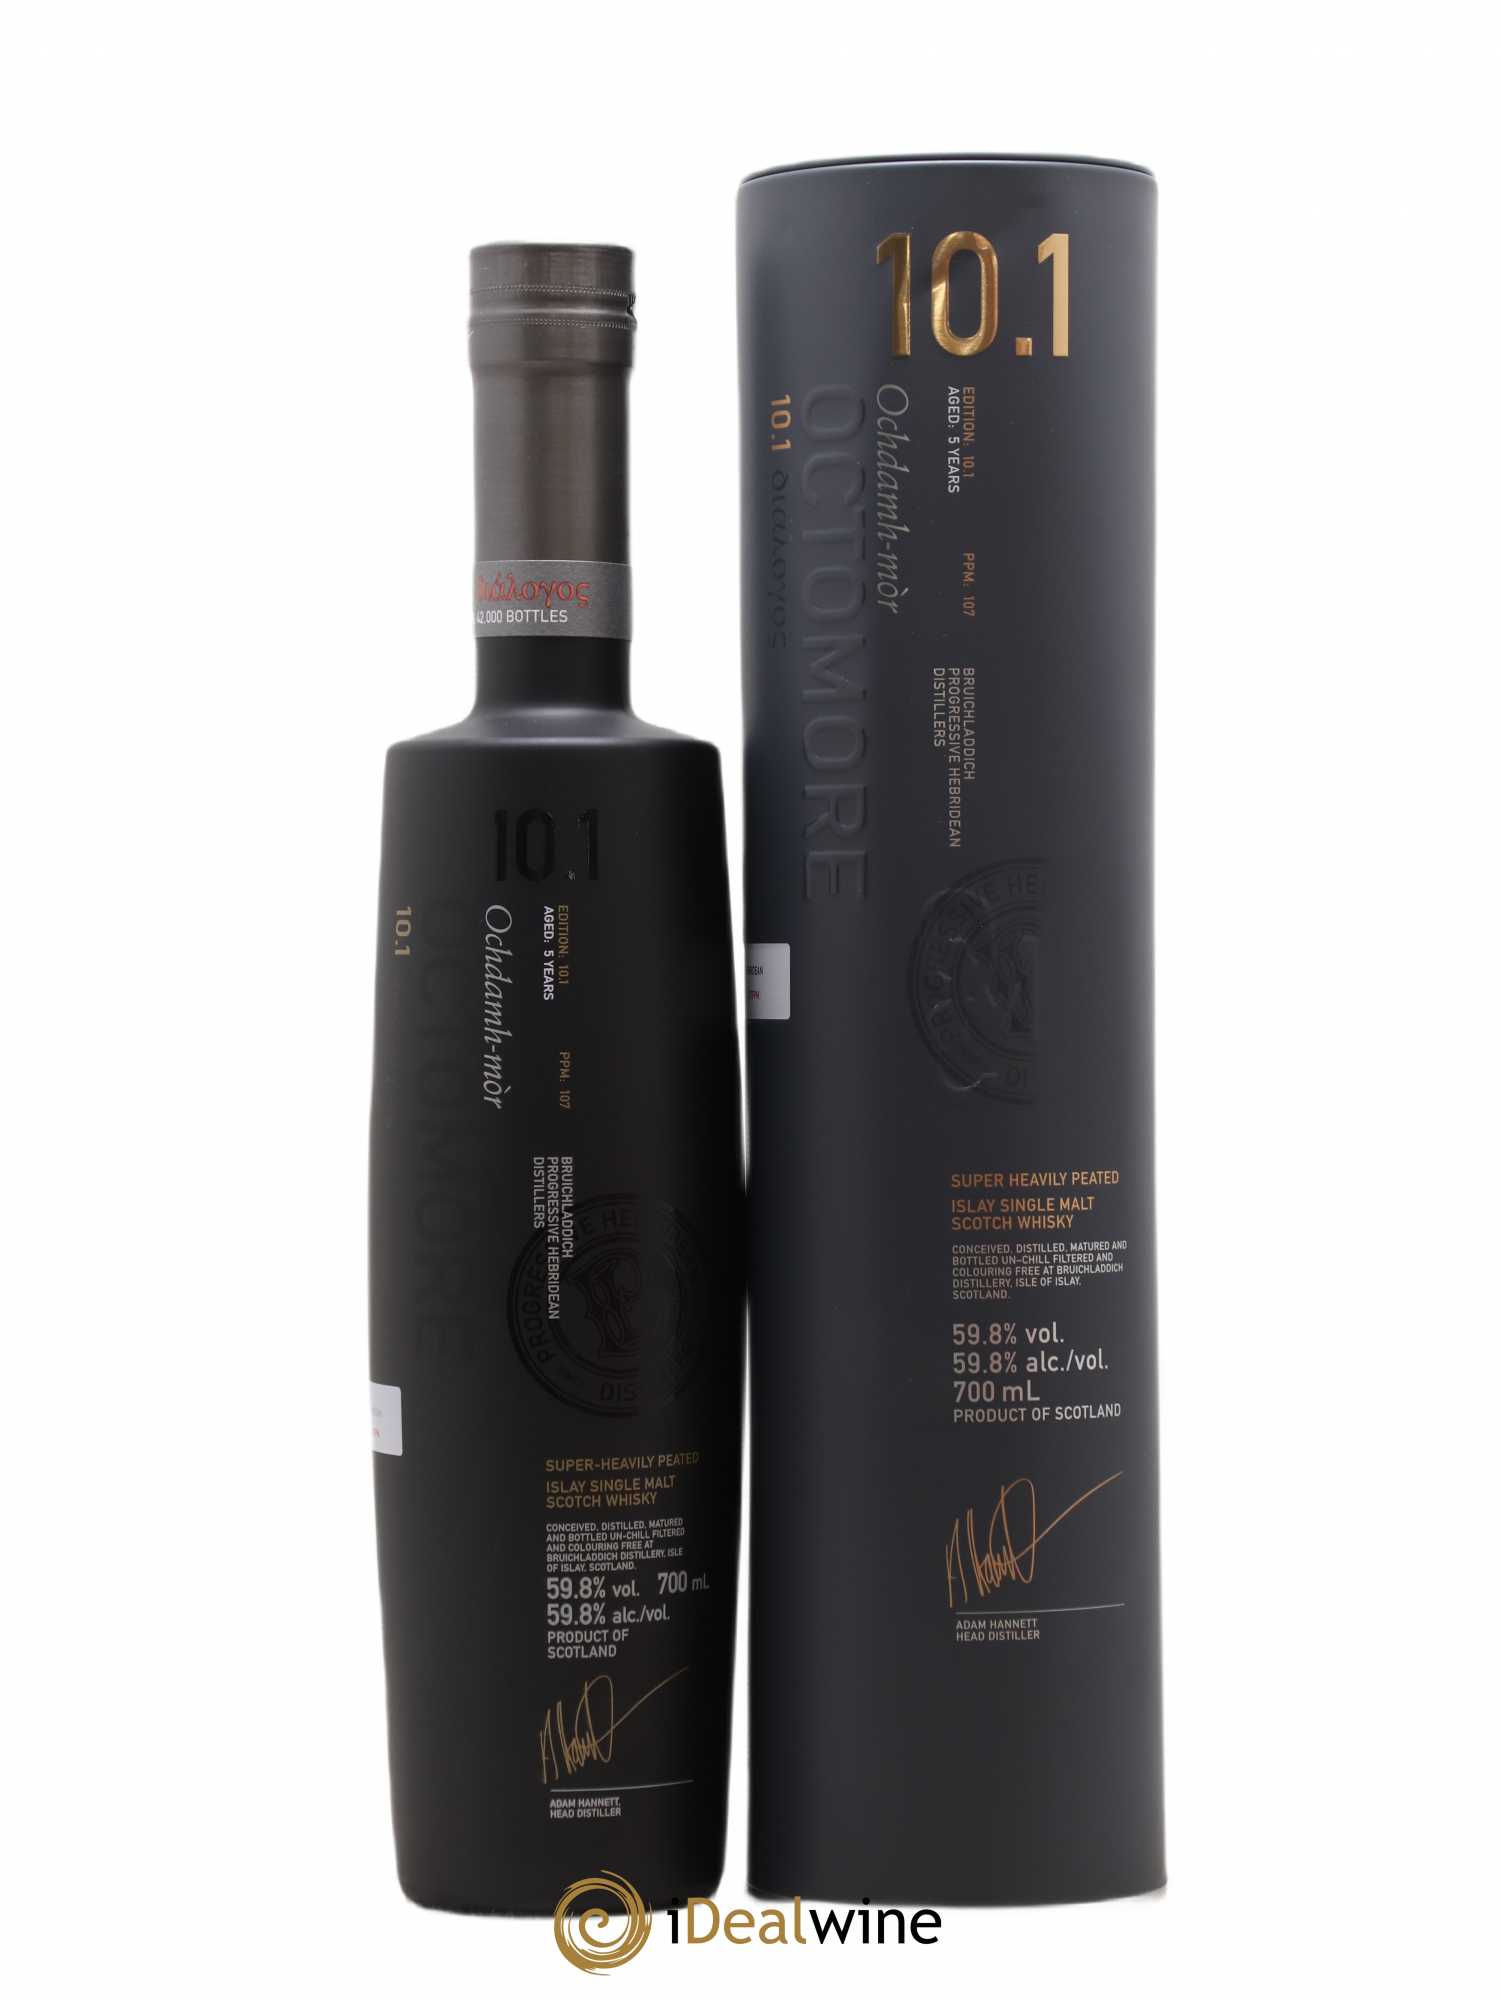 Octomore 5 years Of. Edition 10.1 Super-Heavily Peated - One of 42000 Limited Edition 